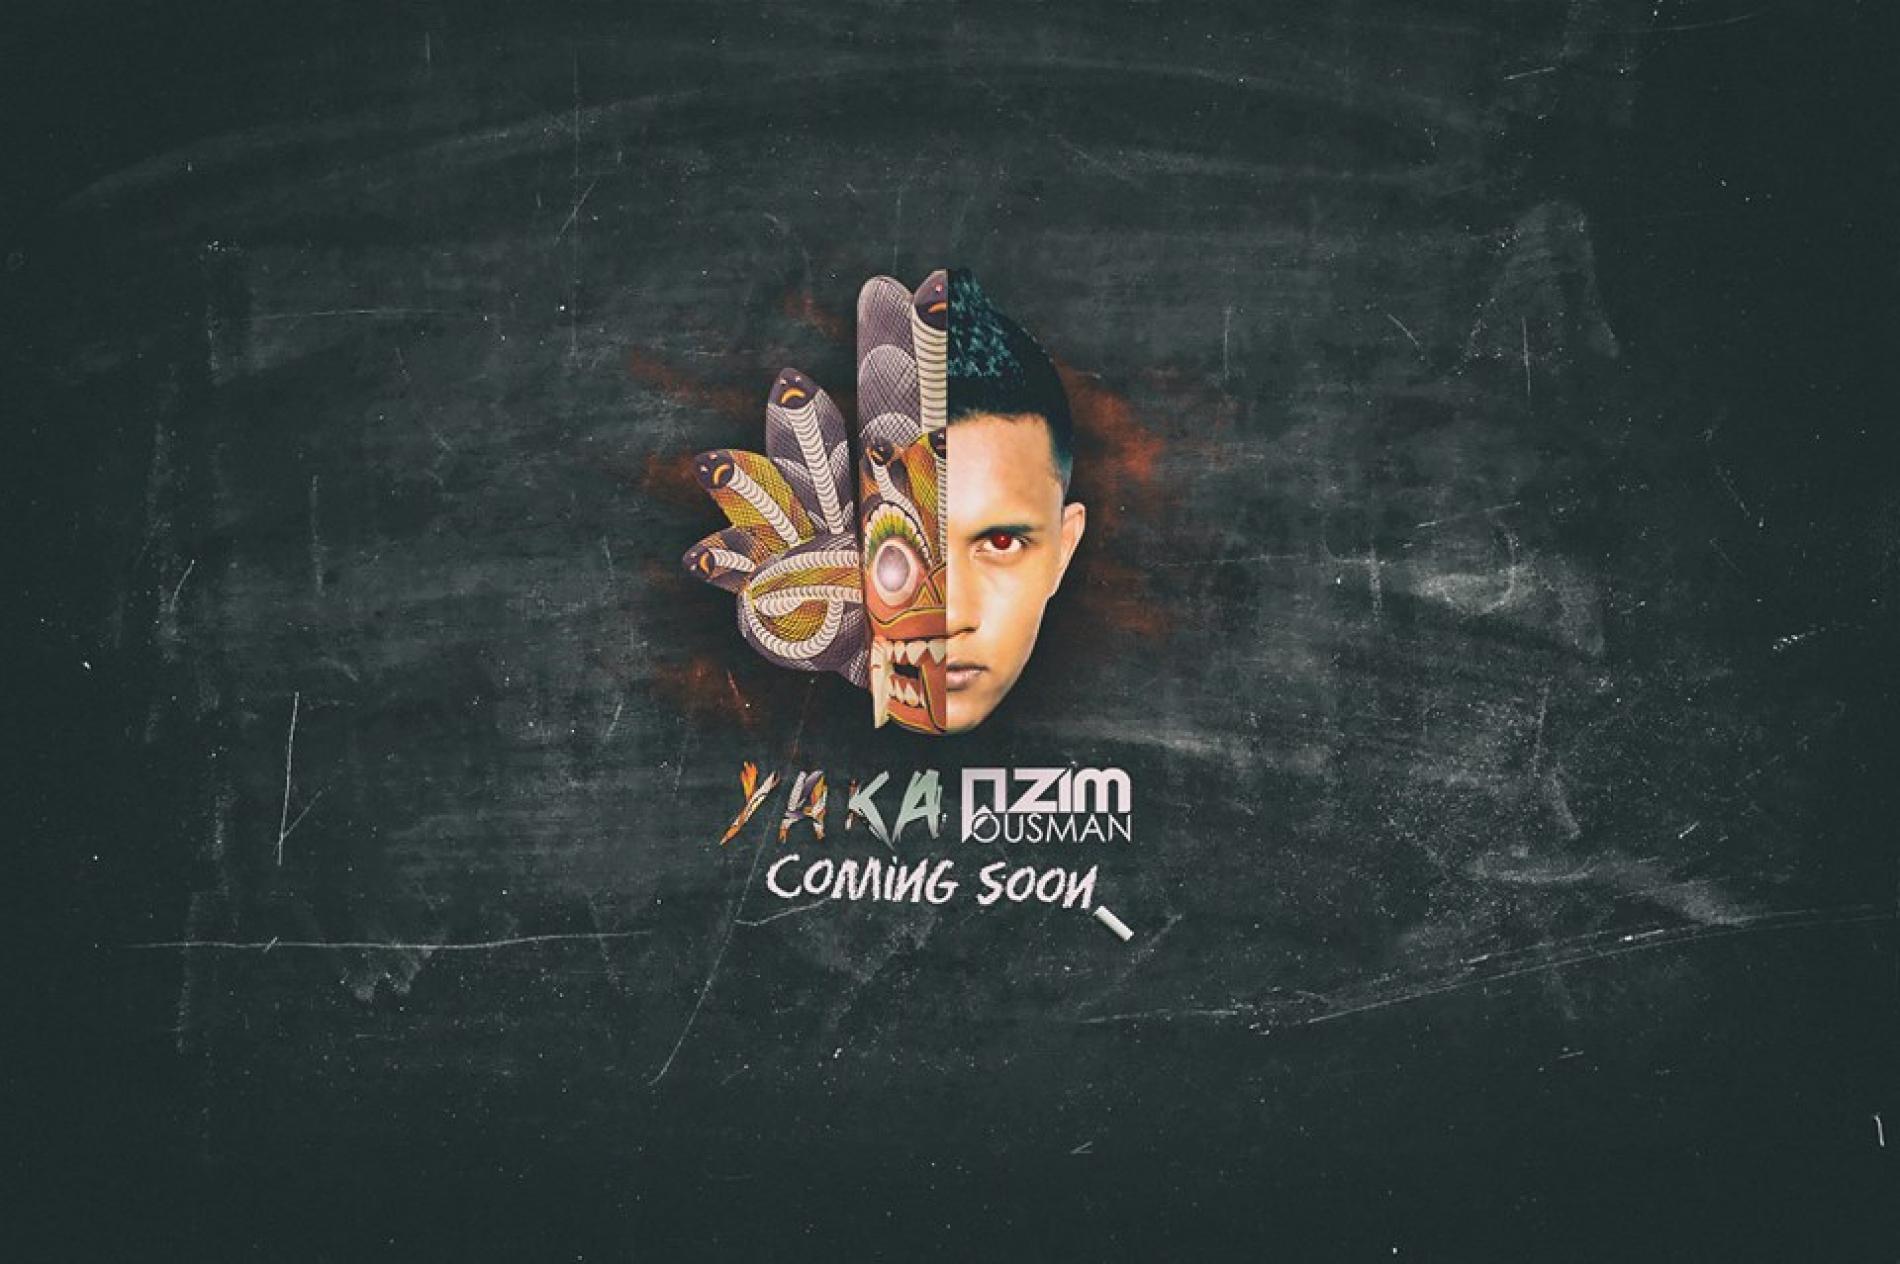 Yaka & Azim Have A Collaba Coming Out Soon